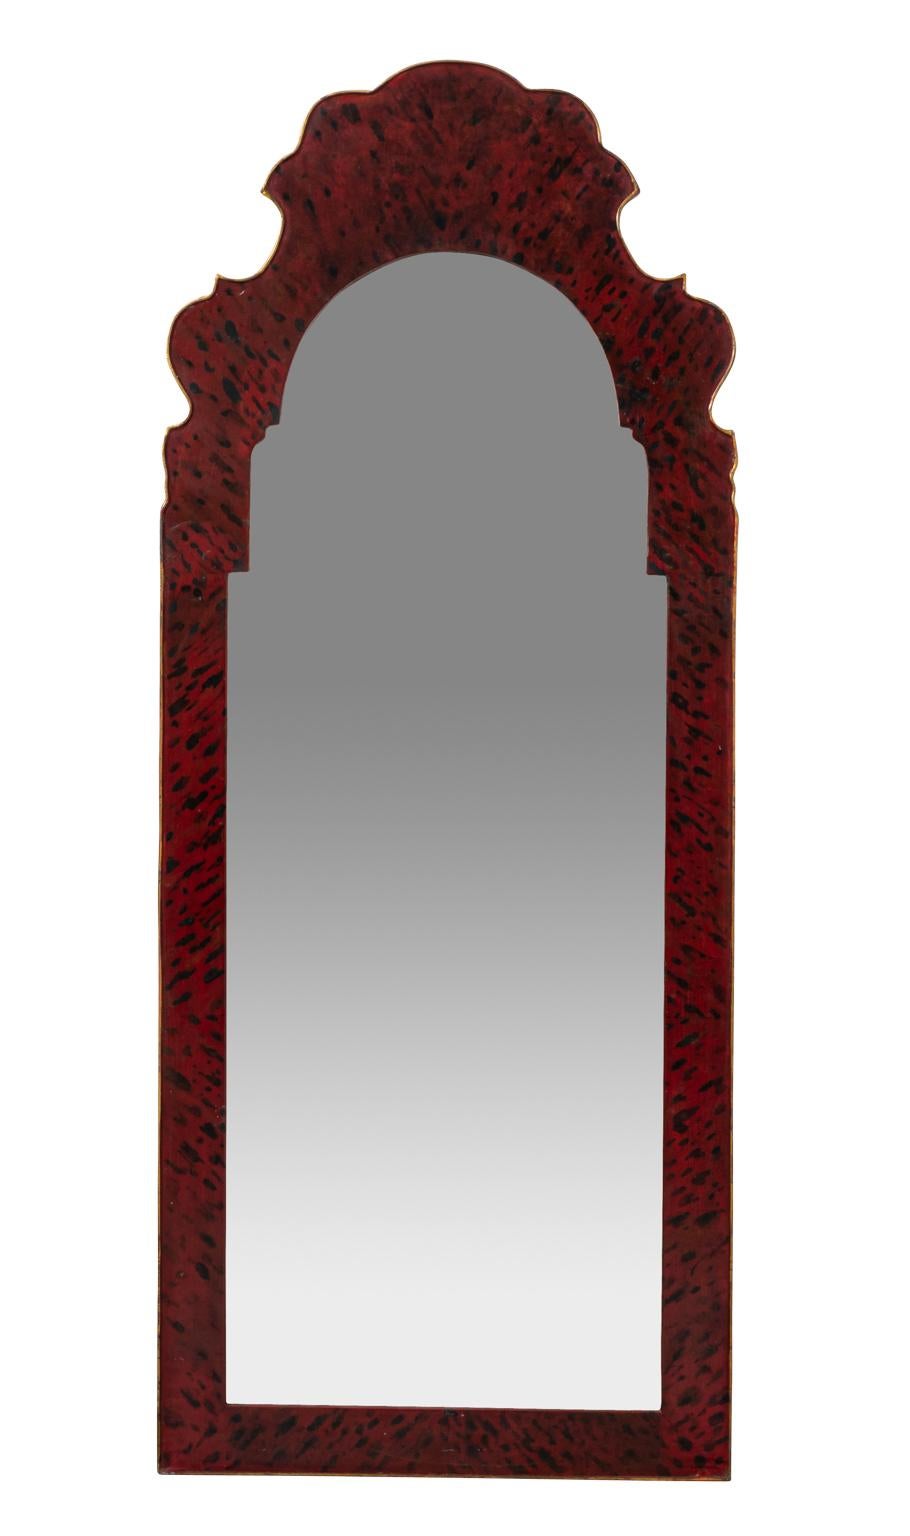 Pair of Tole faux painted mirrors with curved crown. Please note of wear consistent with age including silver loss to the mirror plate and paint loss.